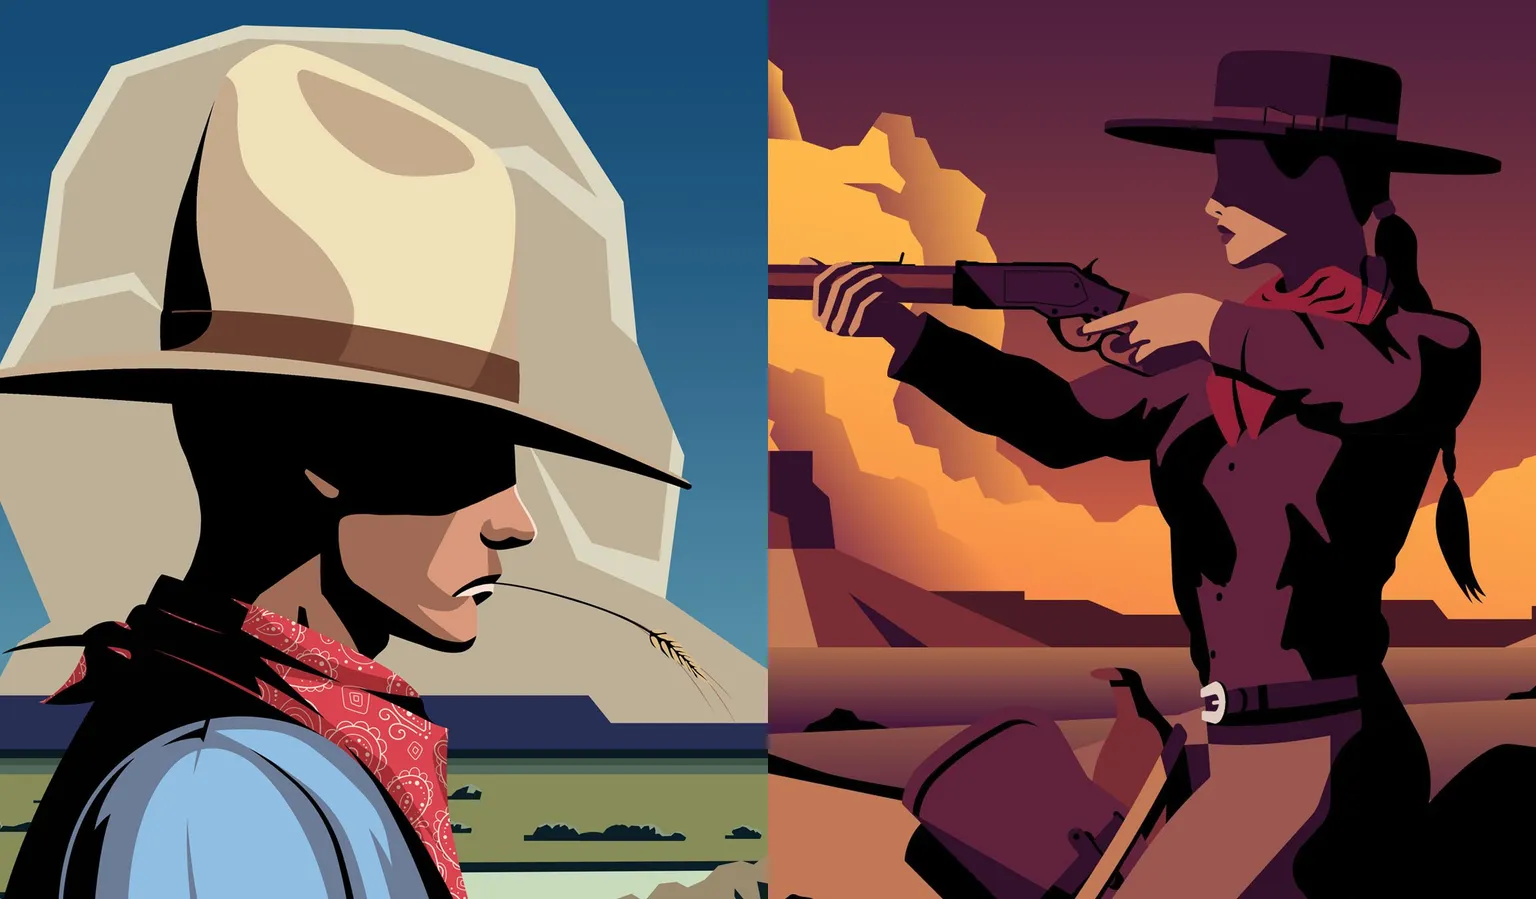 Illustration: "Outlaw" by Outlaws.WTF and "Wild Frontier" by Jeremy Booth.